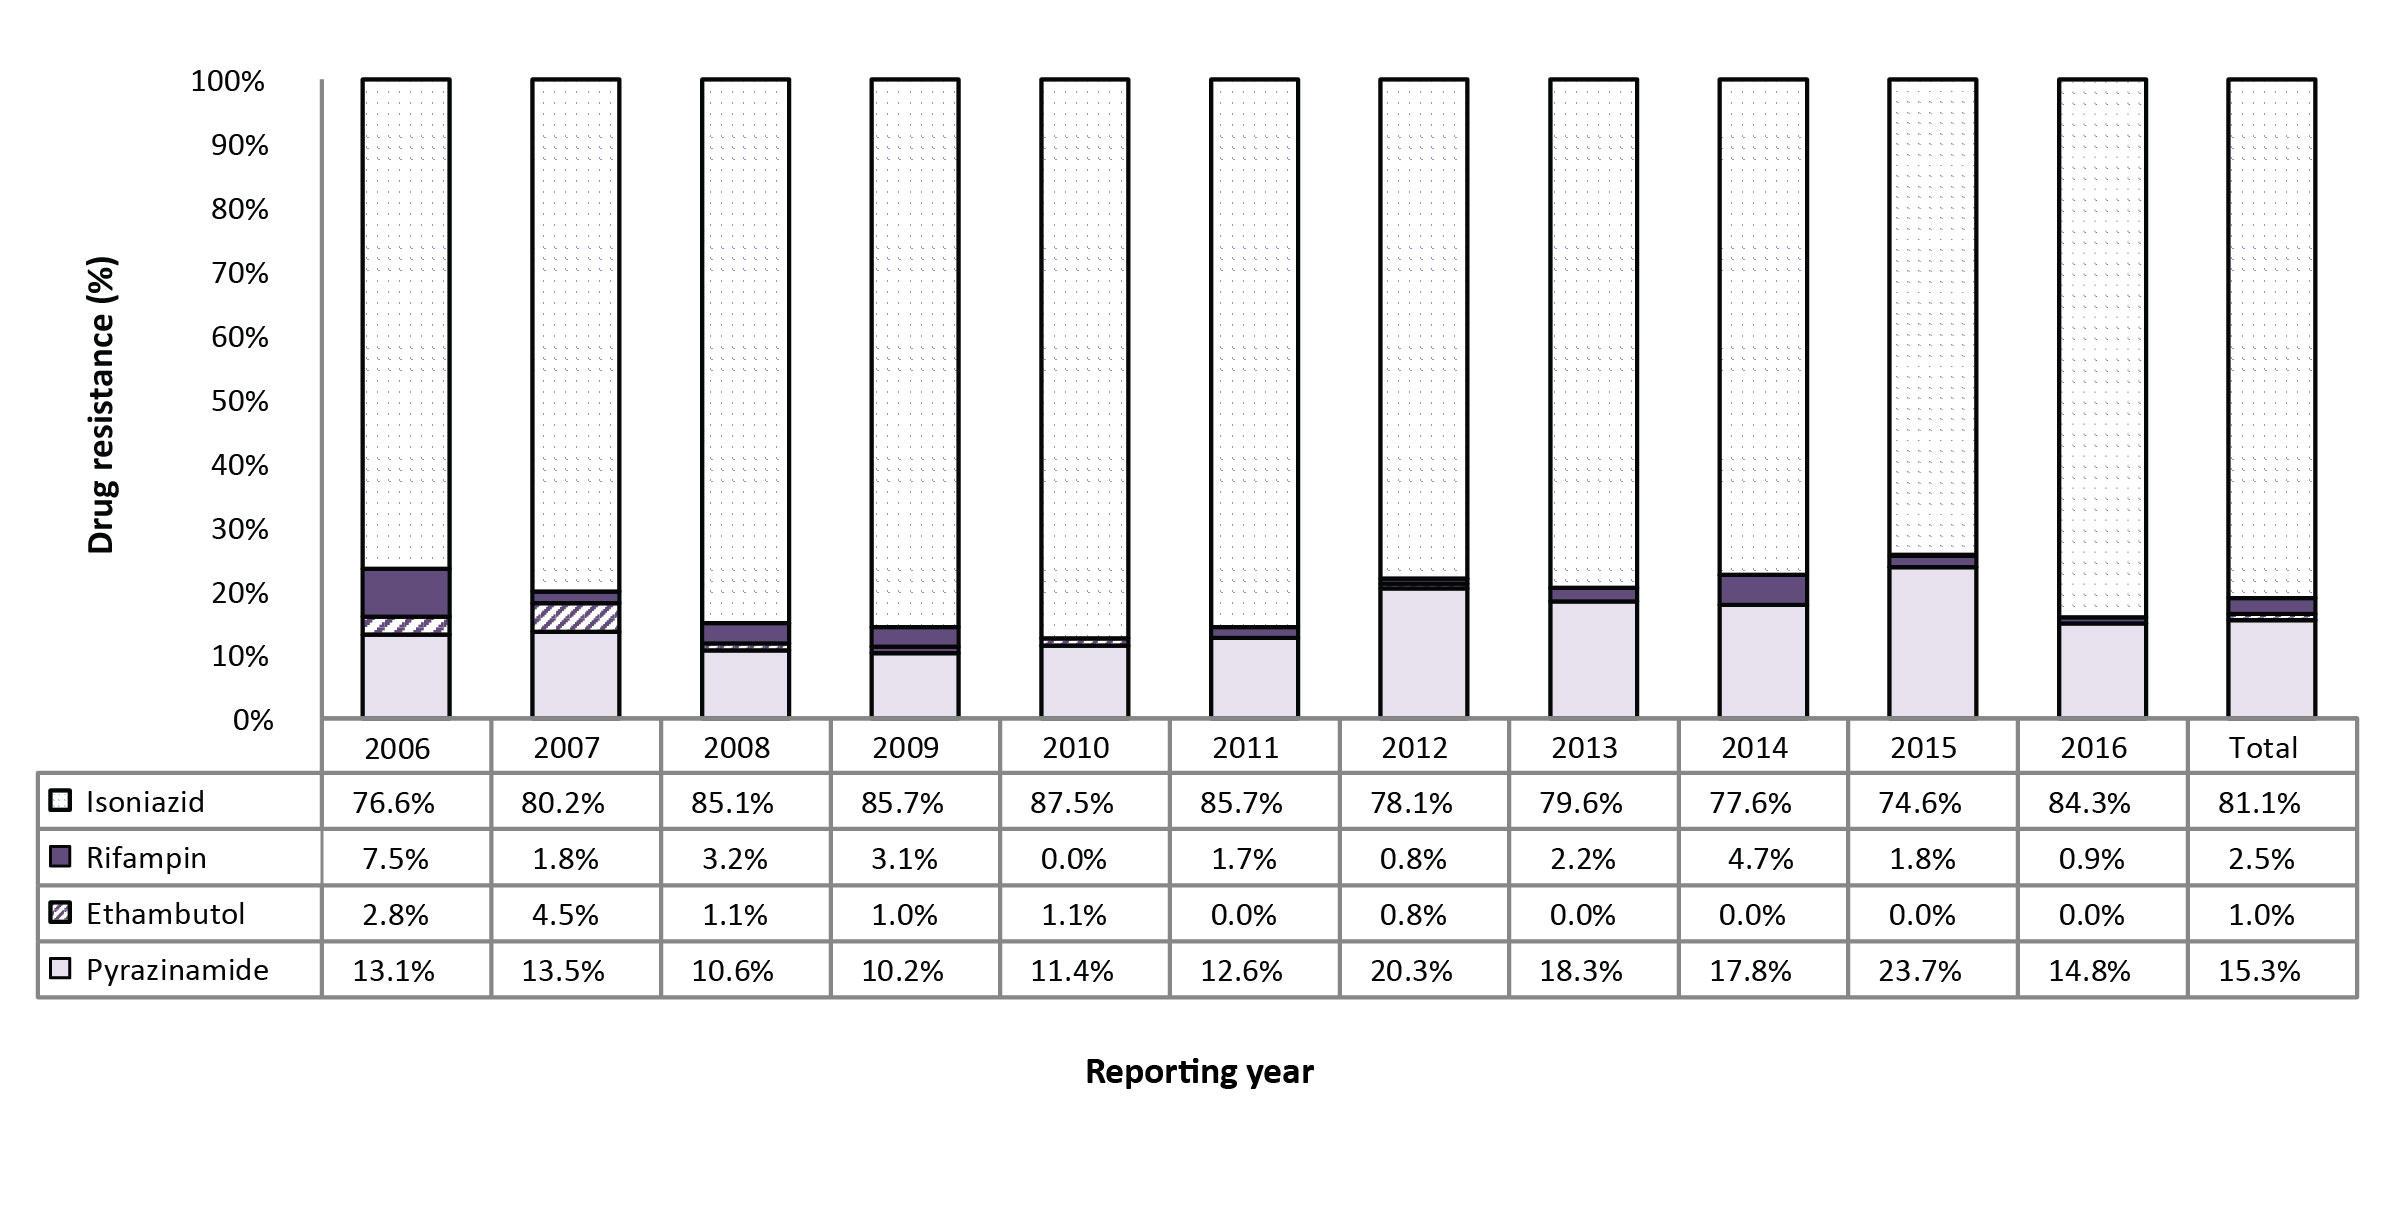 Figure 3: Percentage of monoresistant isolates resistant to isoniazid, pyrazinamide, rifampin, or ethambutol, Canada, 2006 to 2016